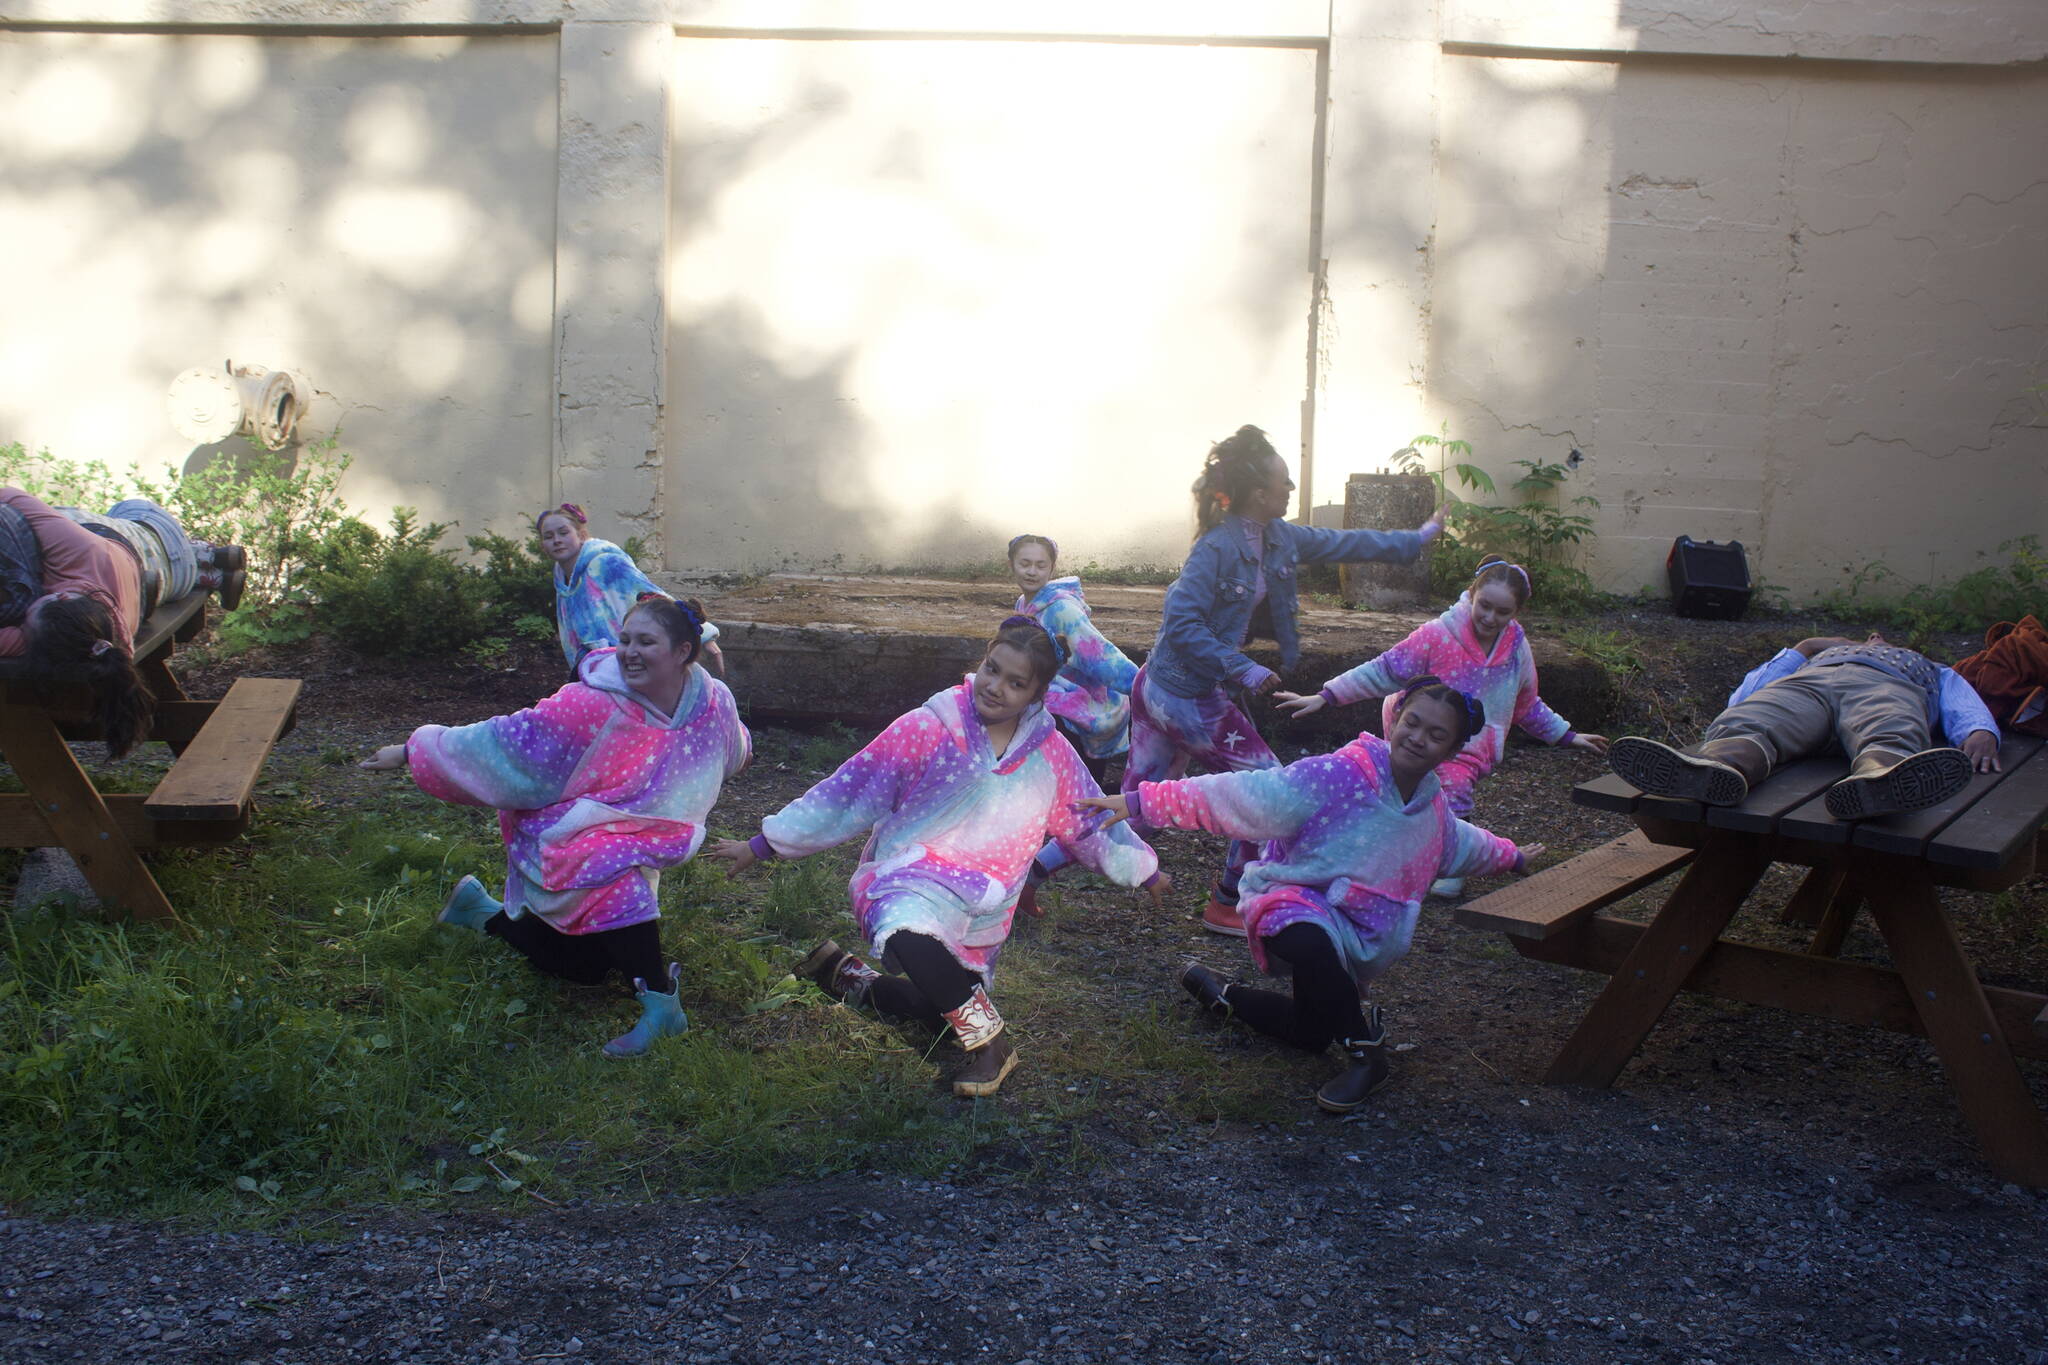 Juneau Dance Theater members rehearse for the outdoor production of “A Midsummer Night’s Dream” at the Treadwell Office Mine on Tuesday. (Mark Sabbatini / Juneau Empire)